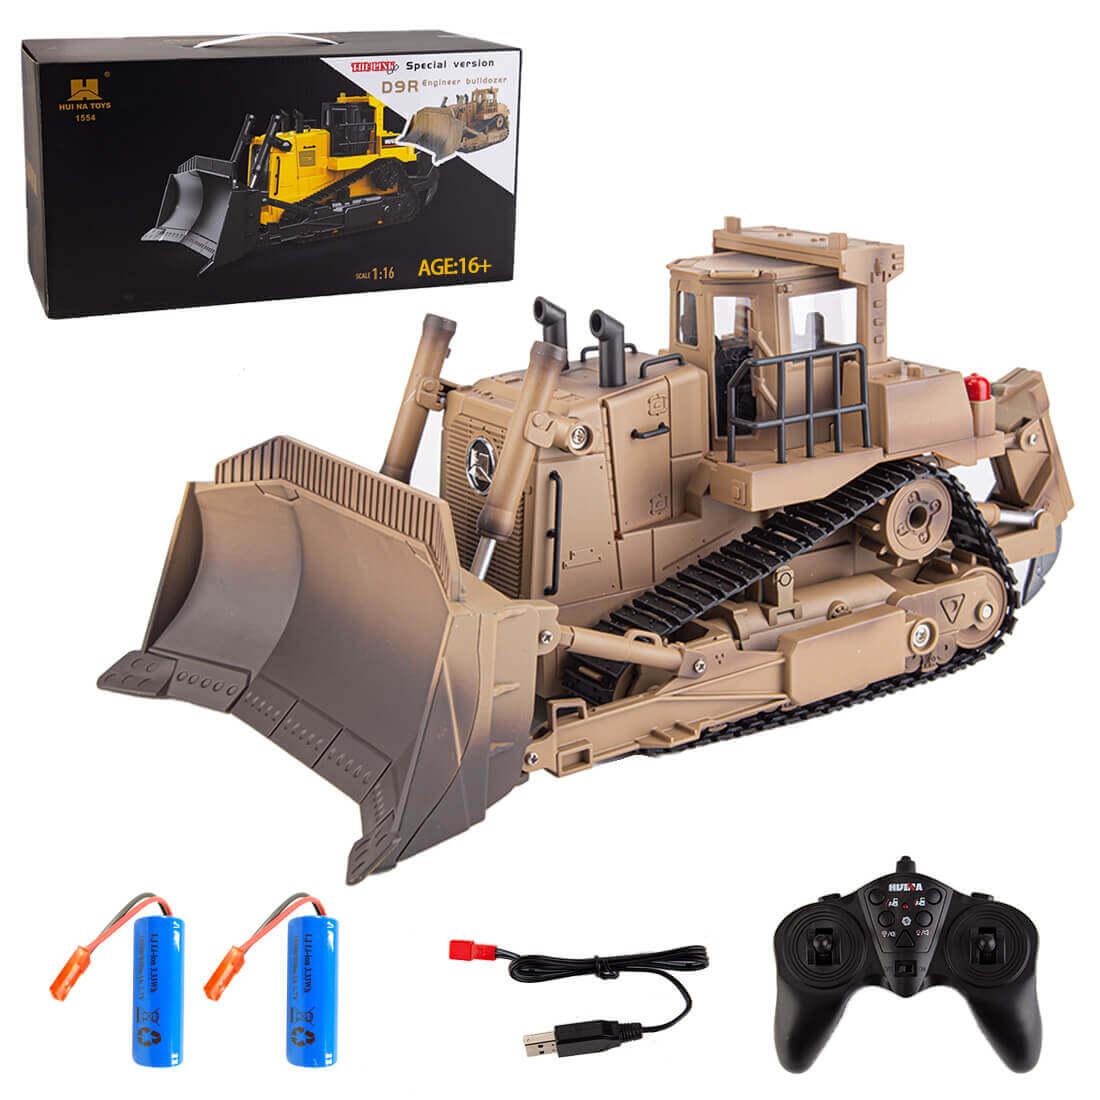 THE LINK×HUINA 1/16 2.4GHz 9CH RC US Army Armored Engineering Bulldozer Model D9R 2